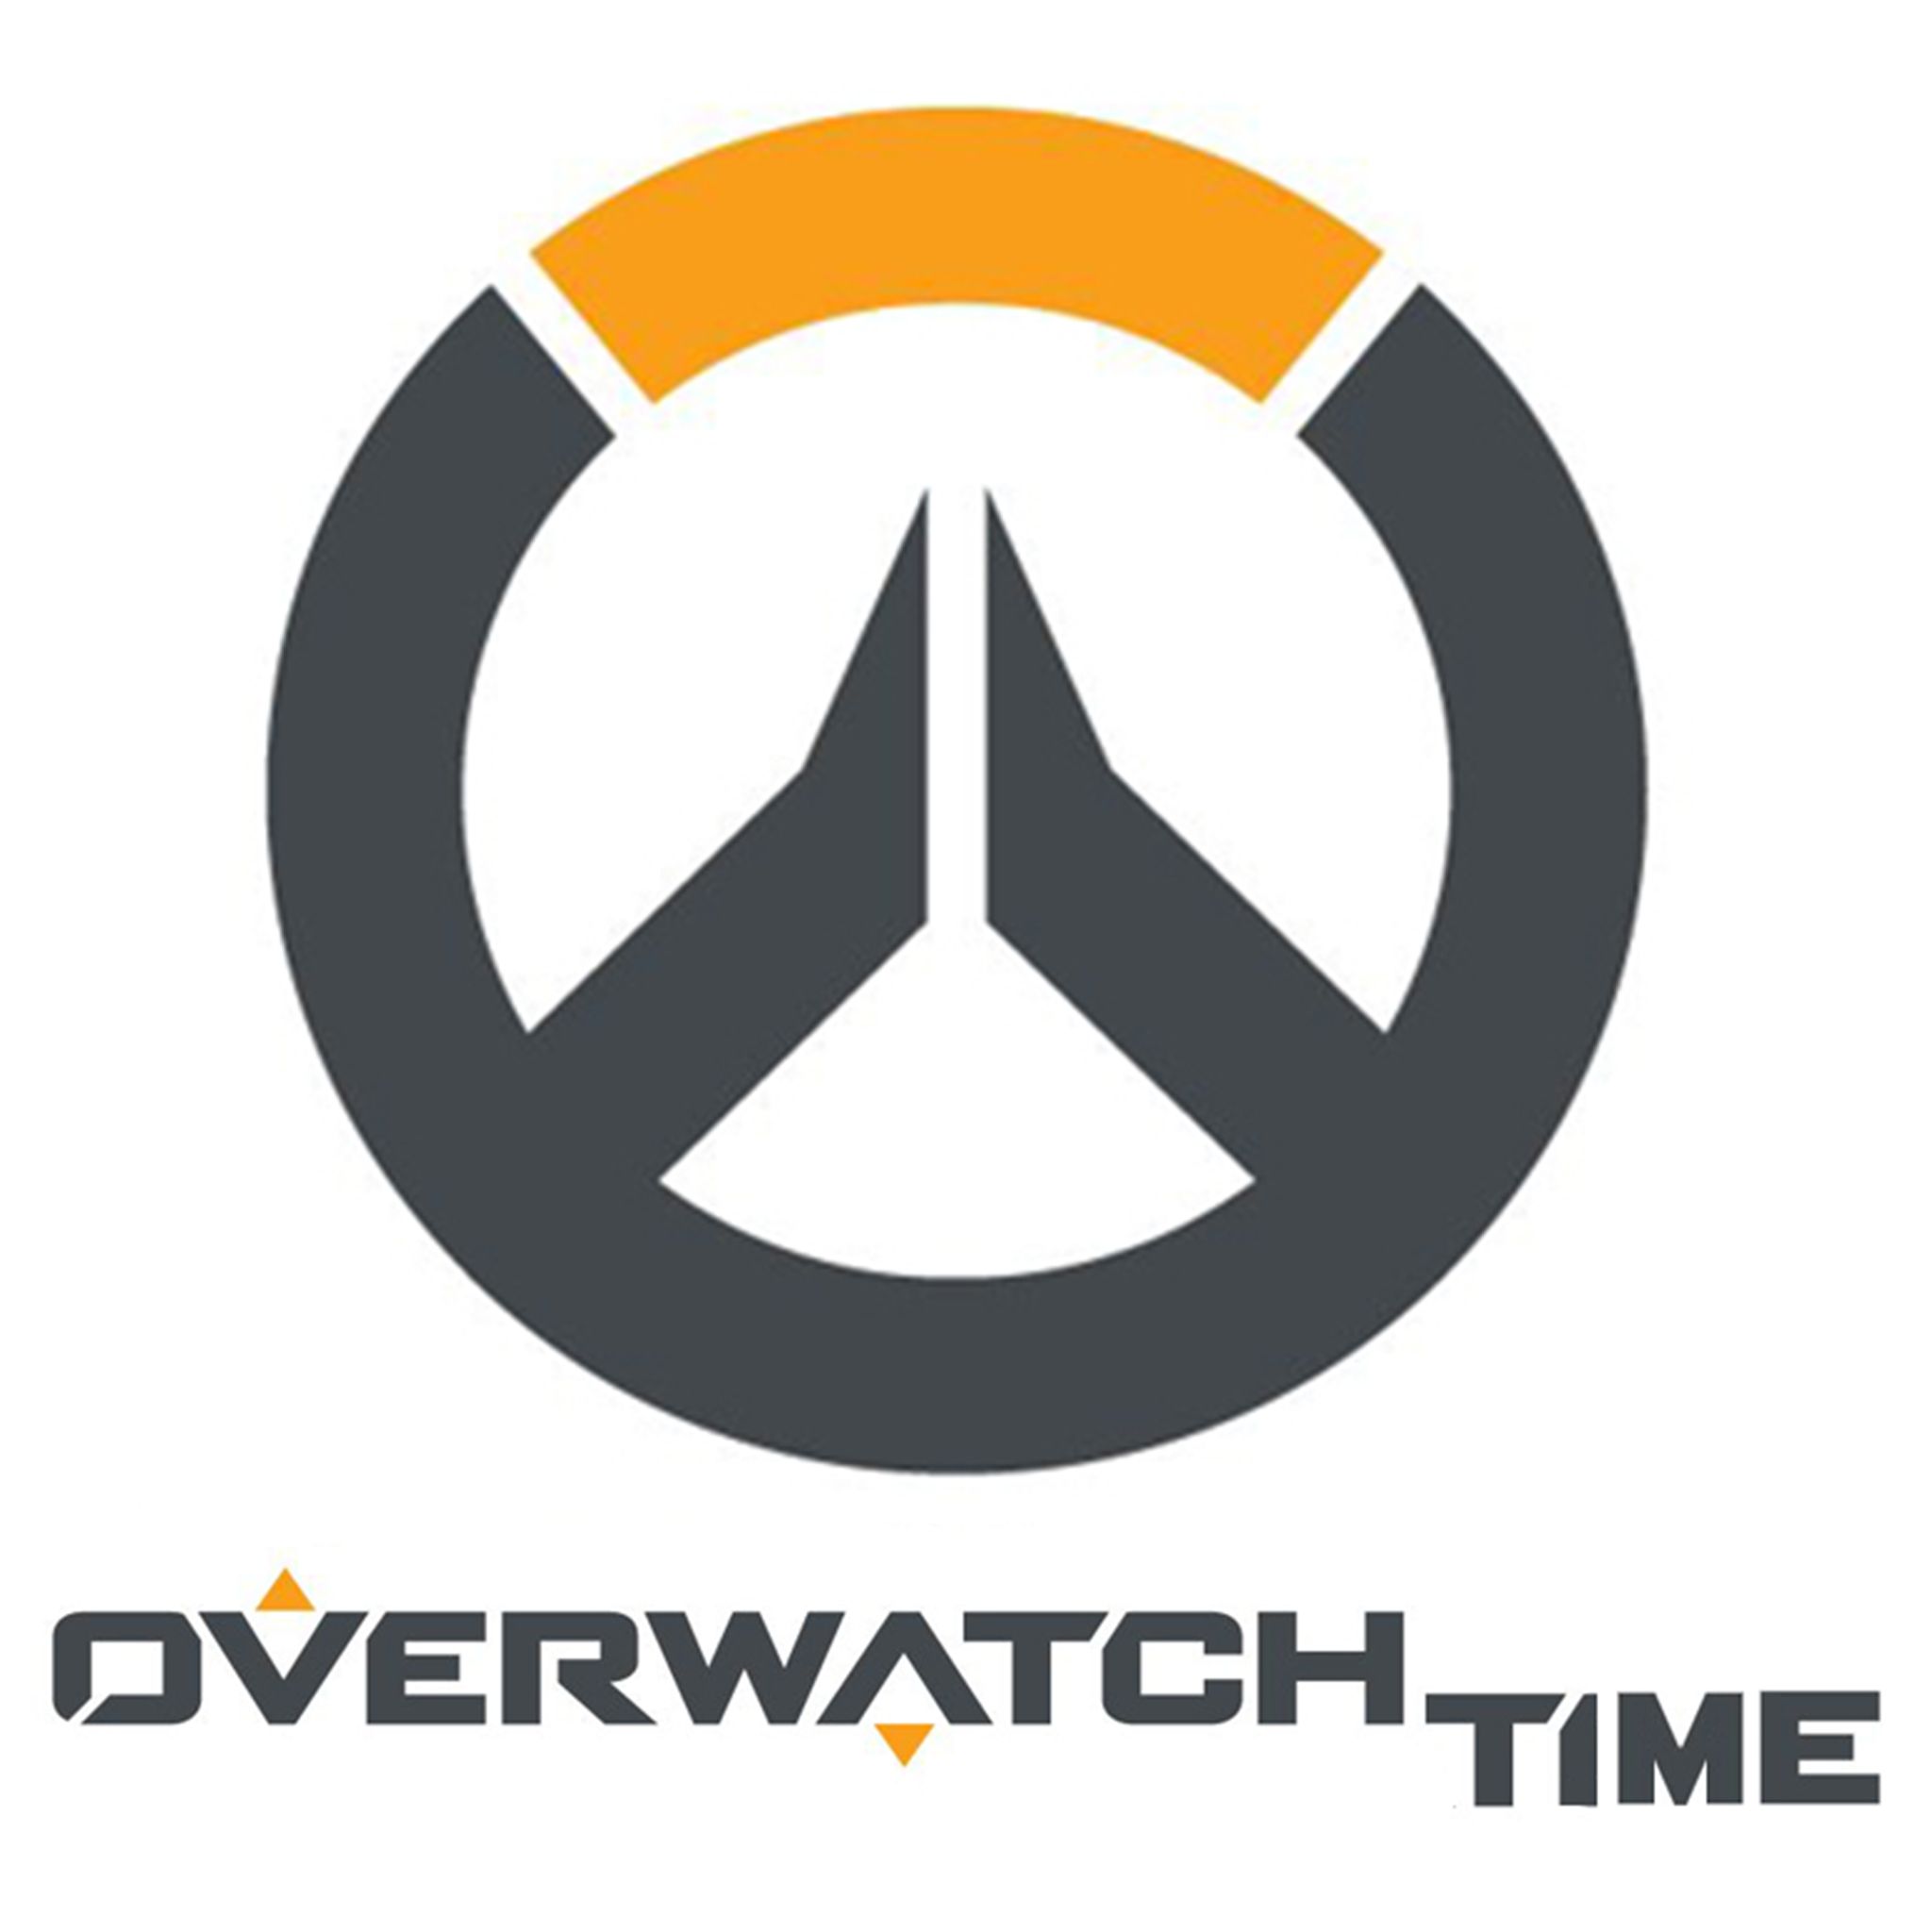 Overwatch Time